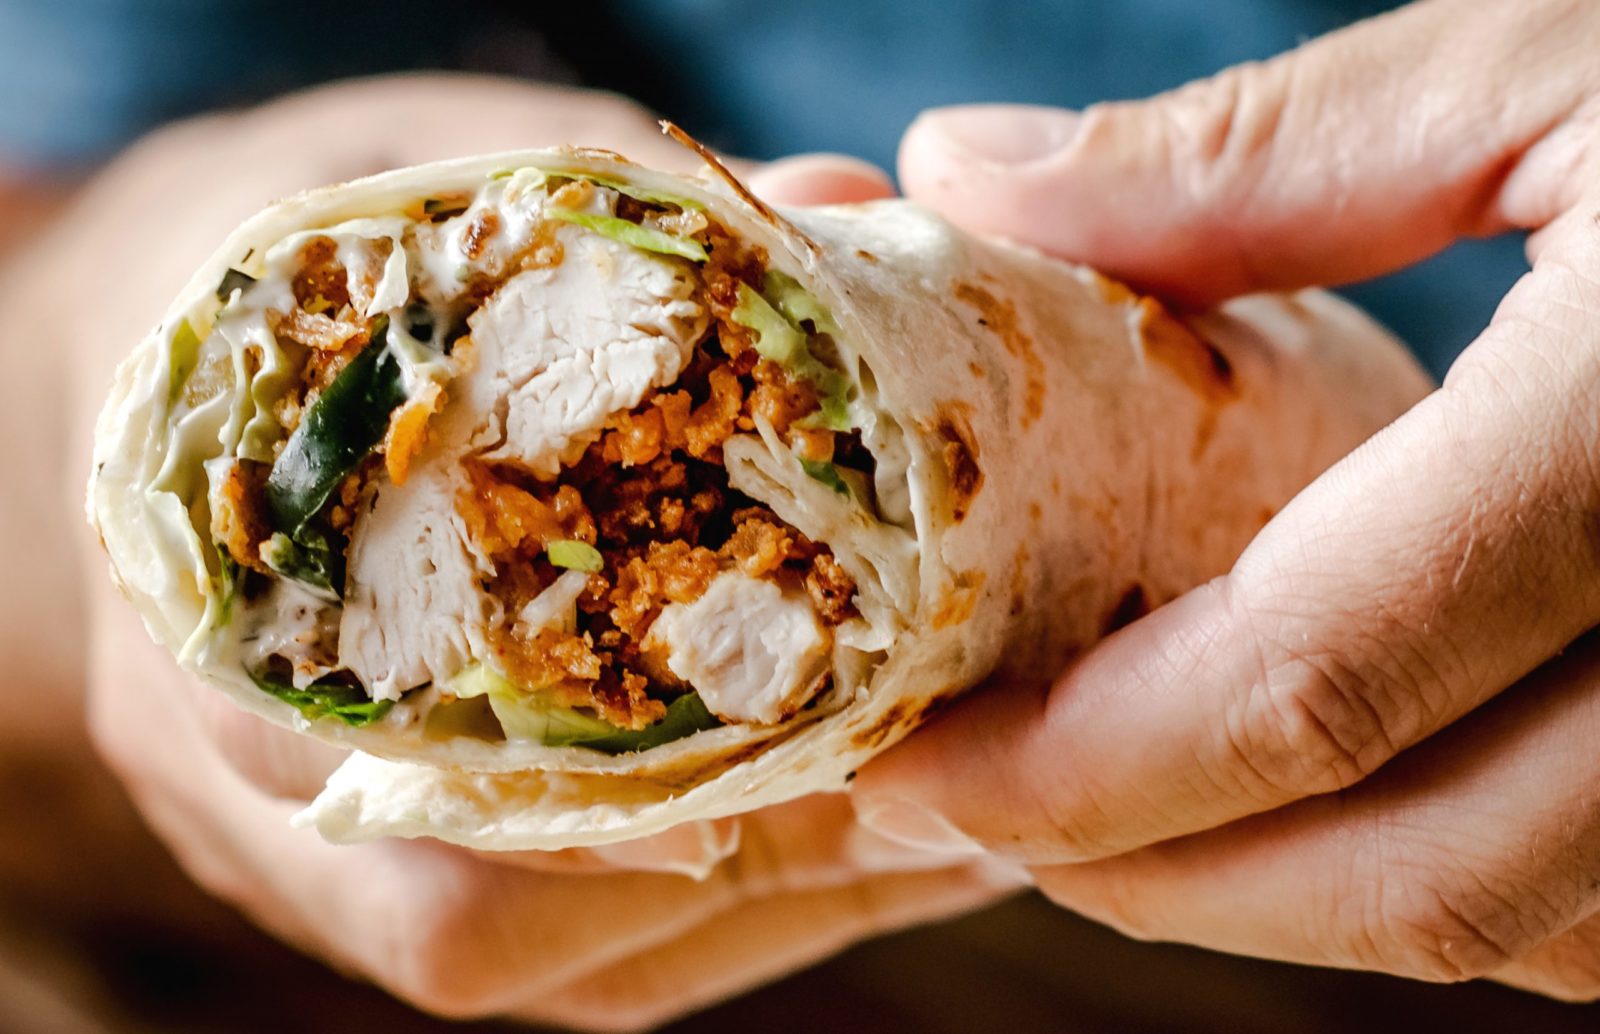 View of the George pub's chicken wrap from the perspective of a consumer